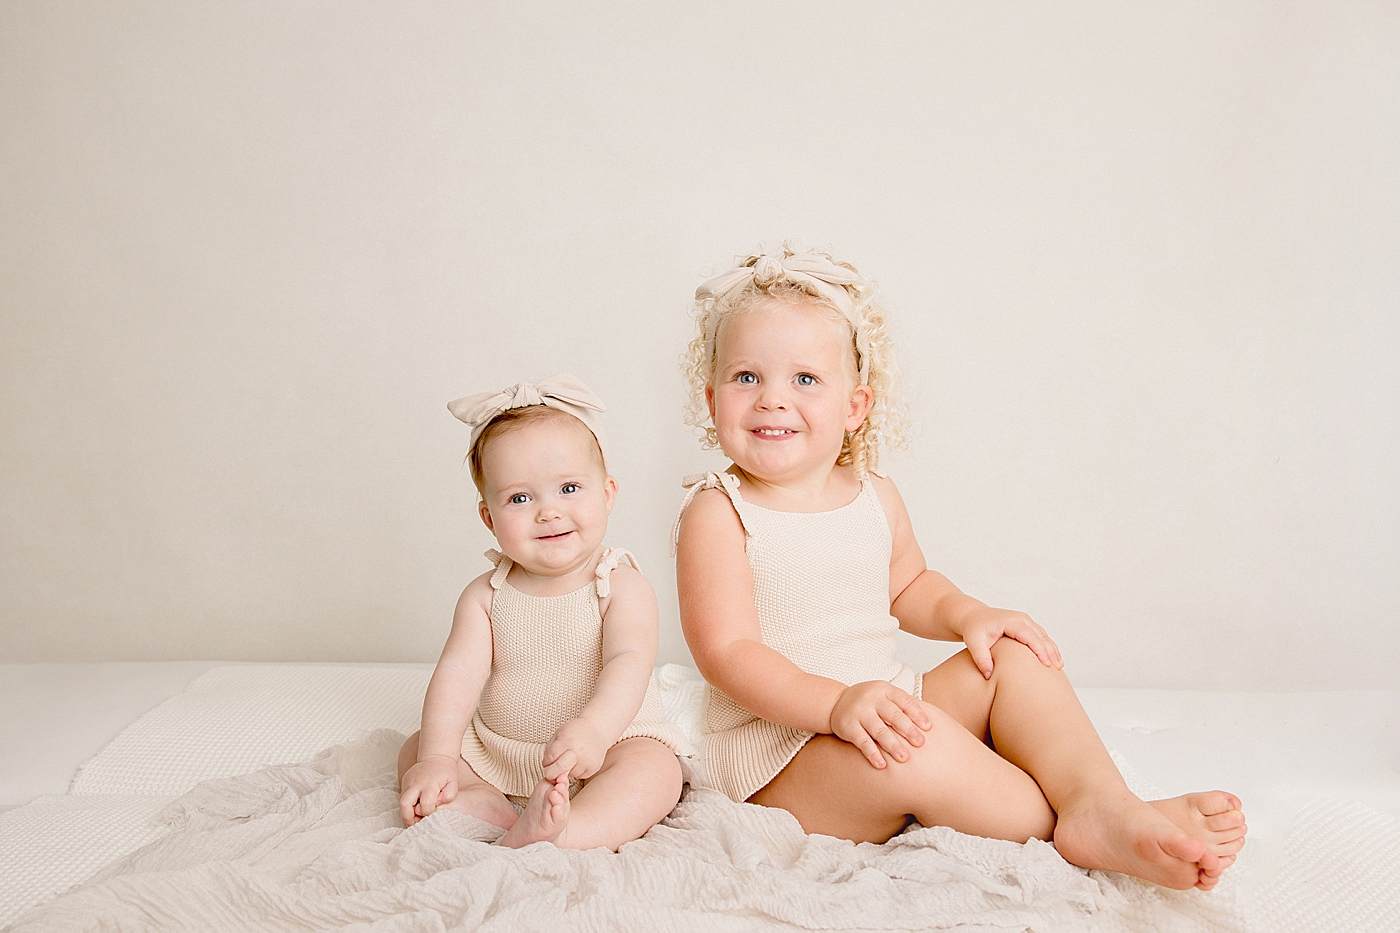 Toddler sisters in white sitting in the studio | Image by Halleigh Hill